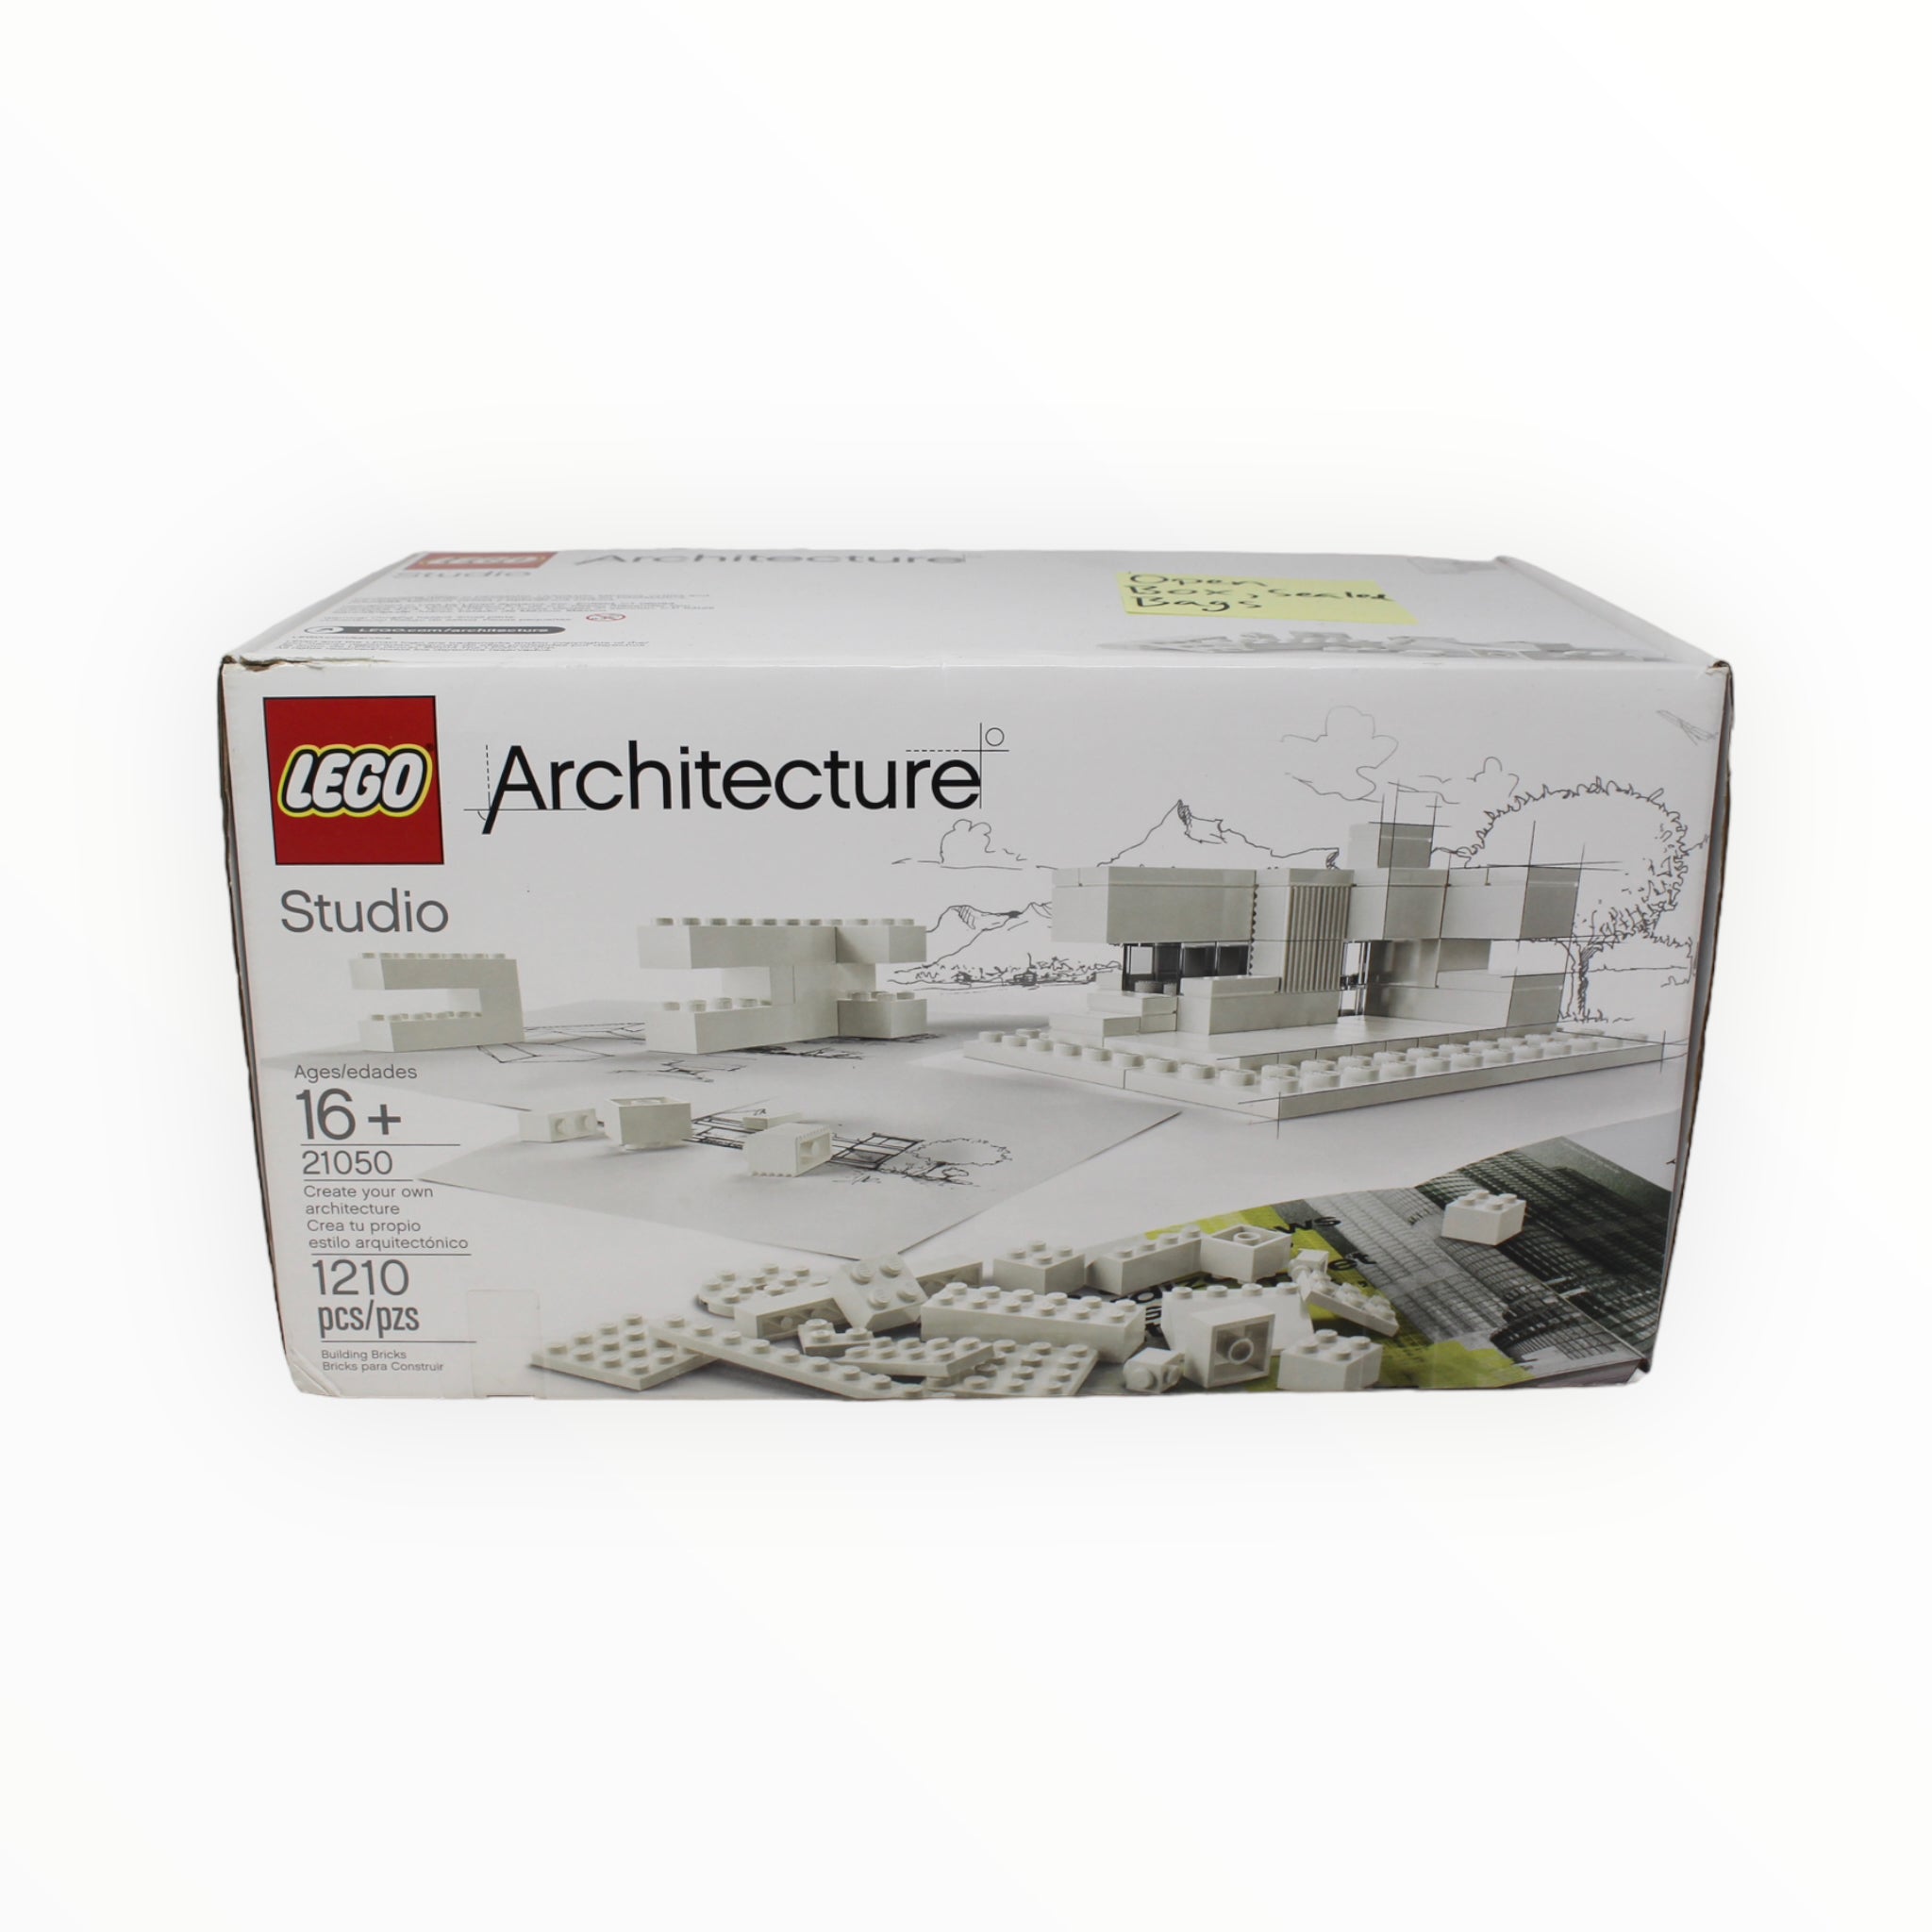 Certified Used Set 21050 Architecture Studio Create your